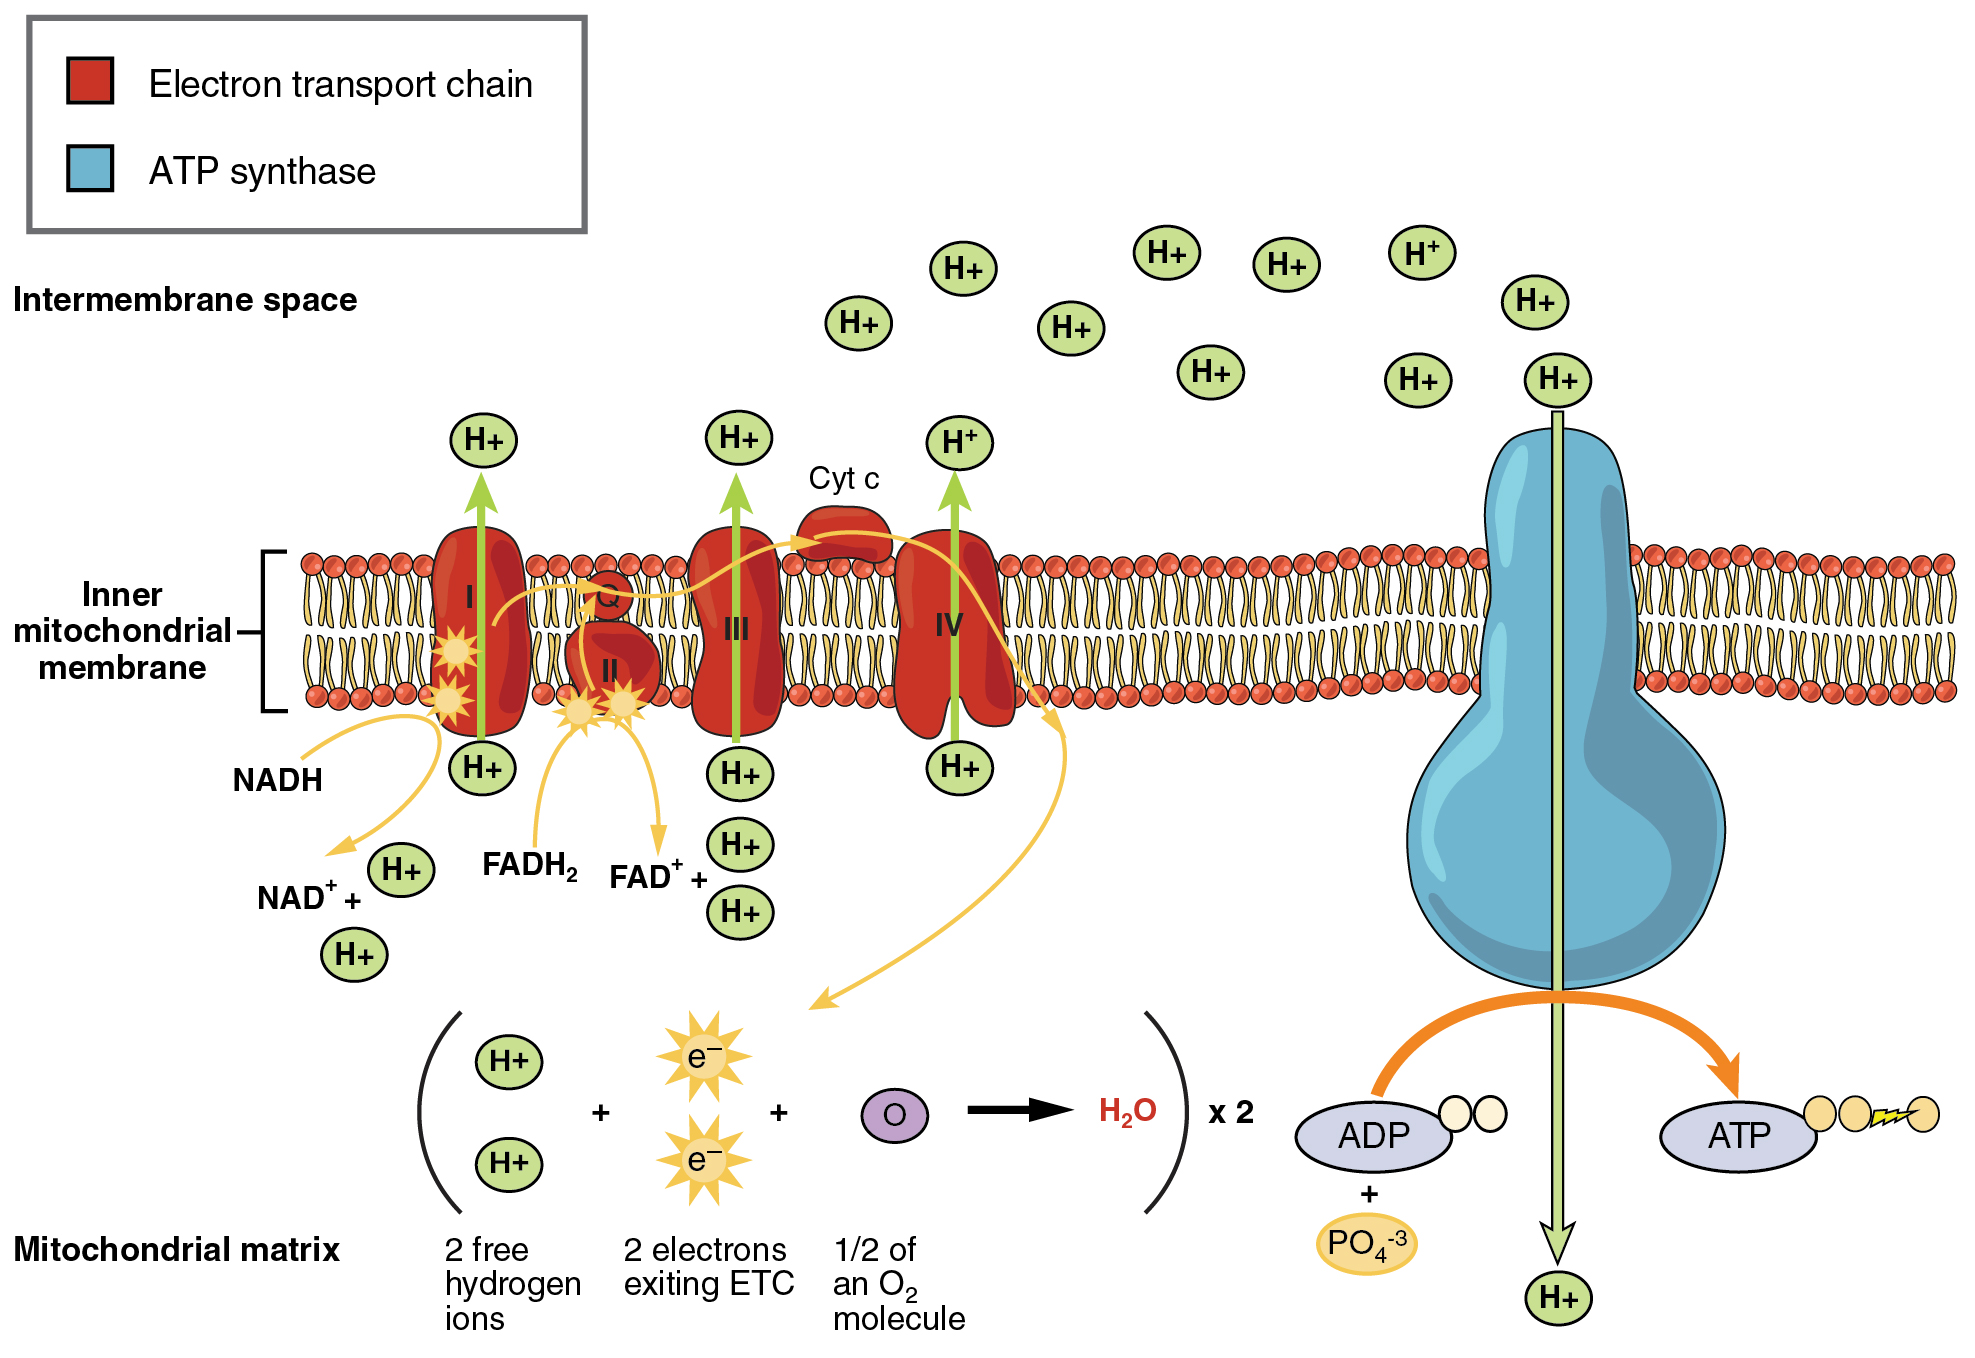 This image shows the mitochondrial membrane with proton pumps and ATP synthase embedded in the membrane. Arrows show the direction of flow of proteins and electrons across the membrane.